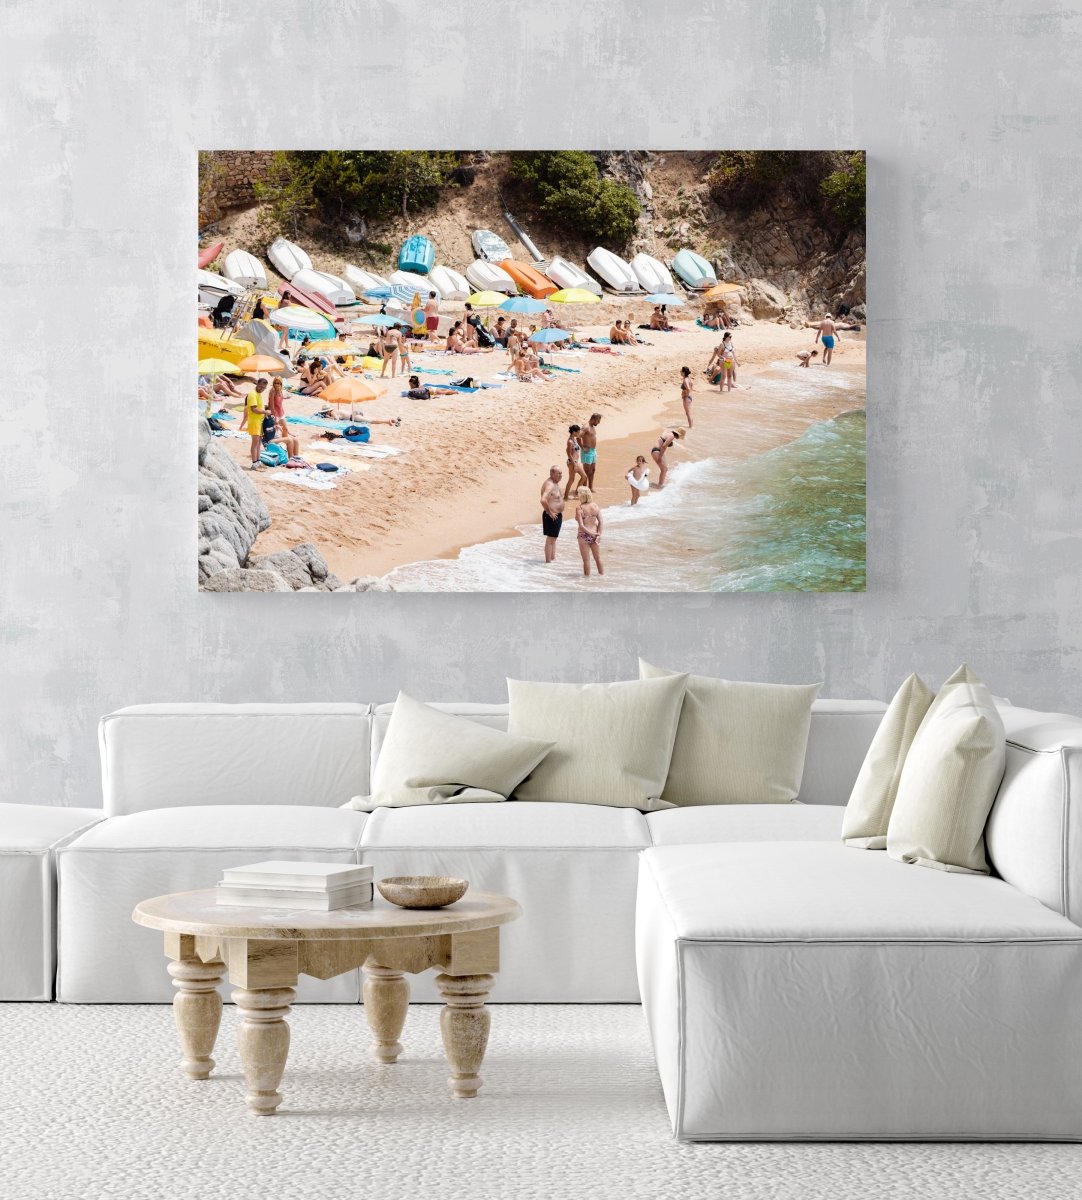 Colorful boats, umbrellas and people lying on beach in an acrylic/perspex frame